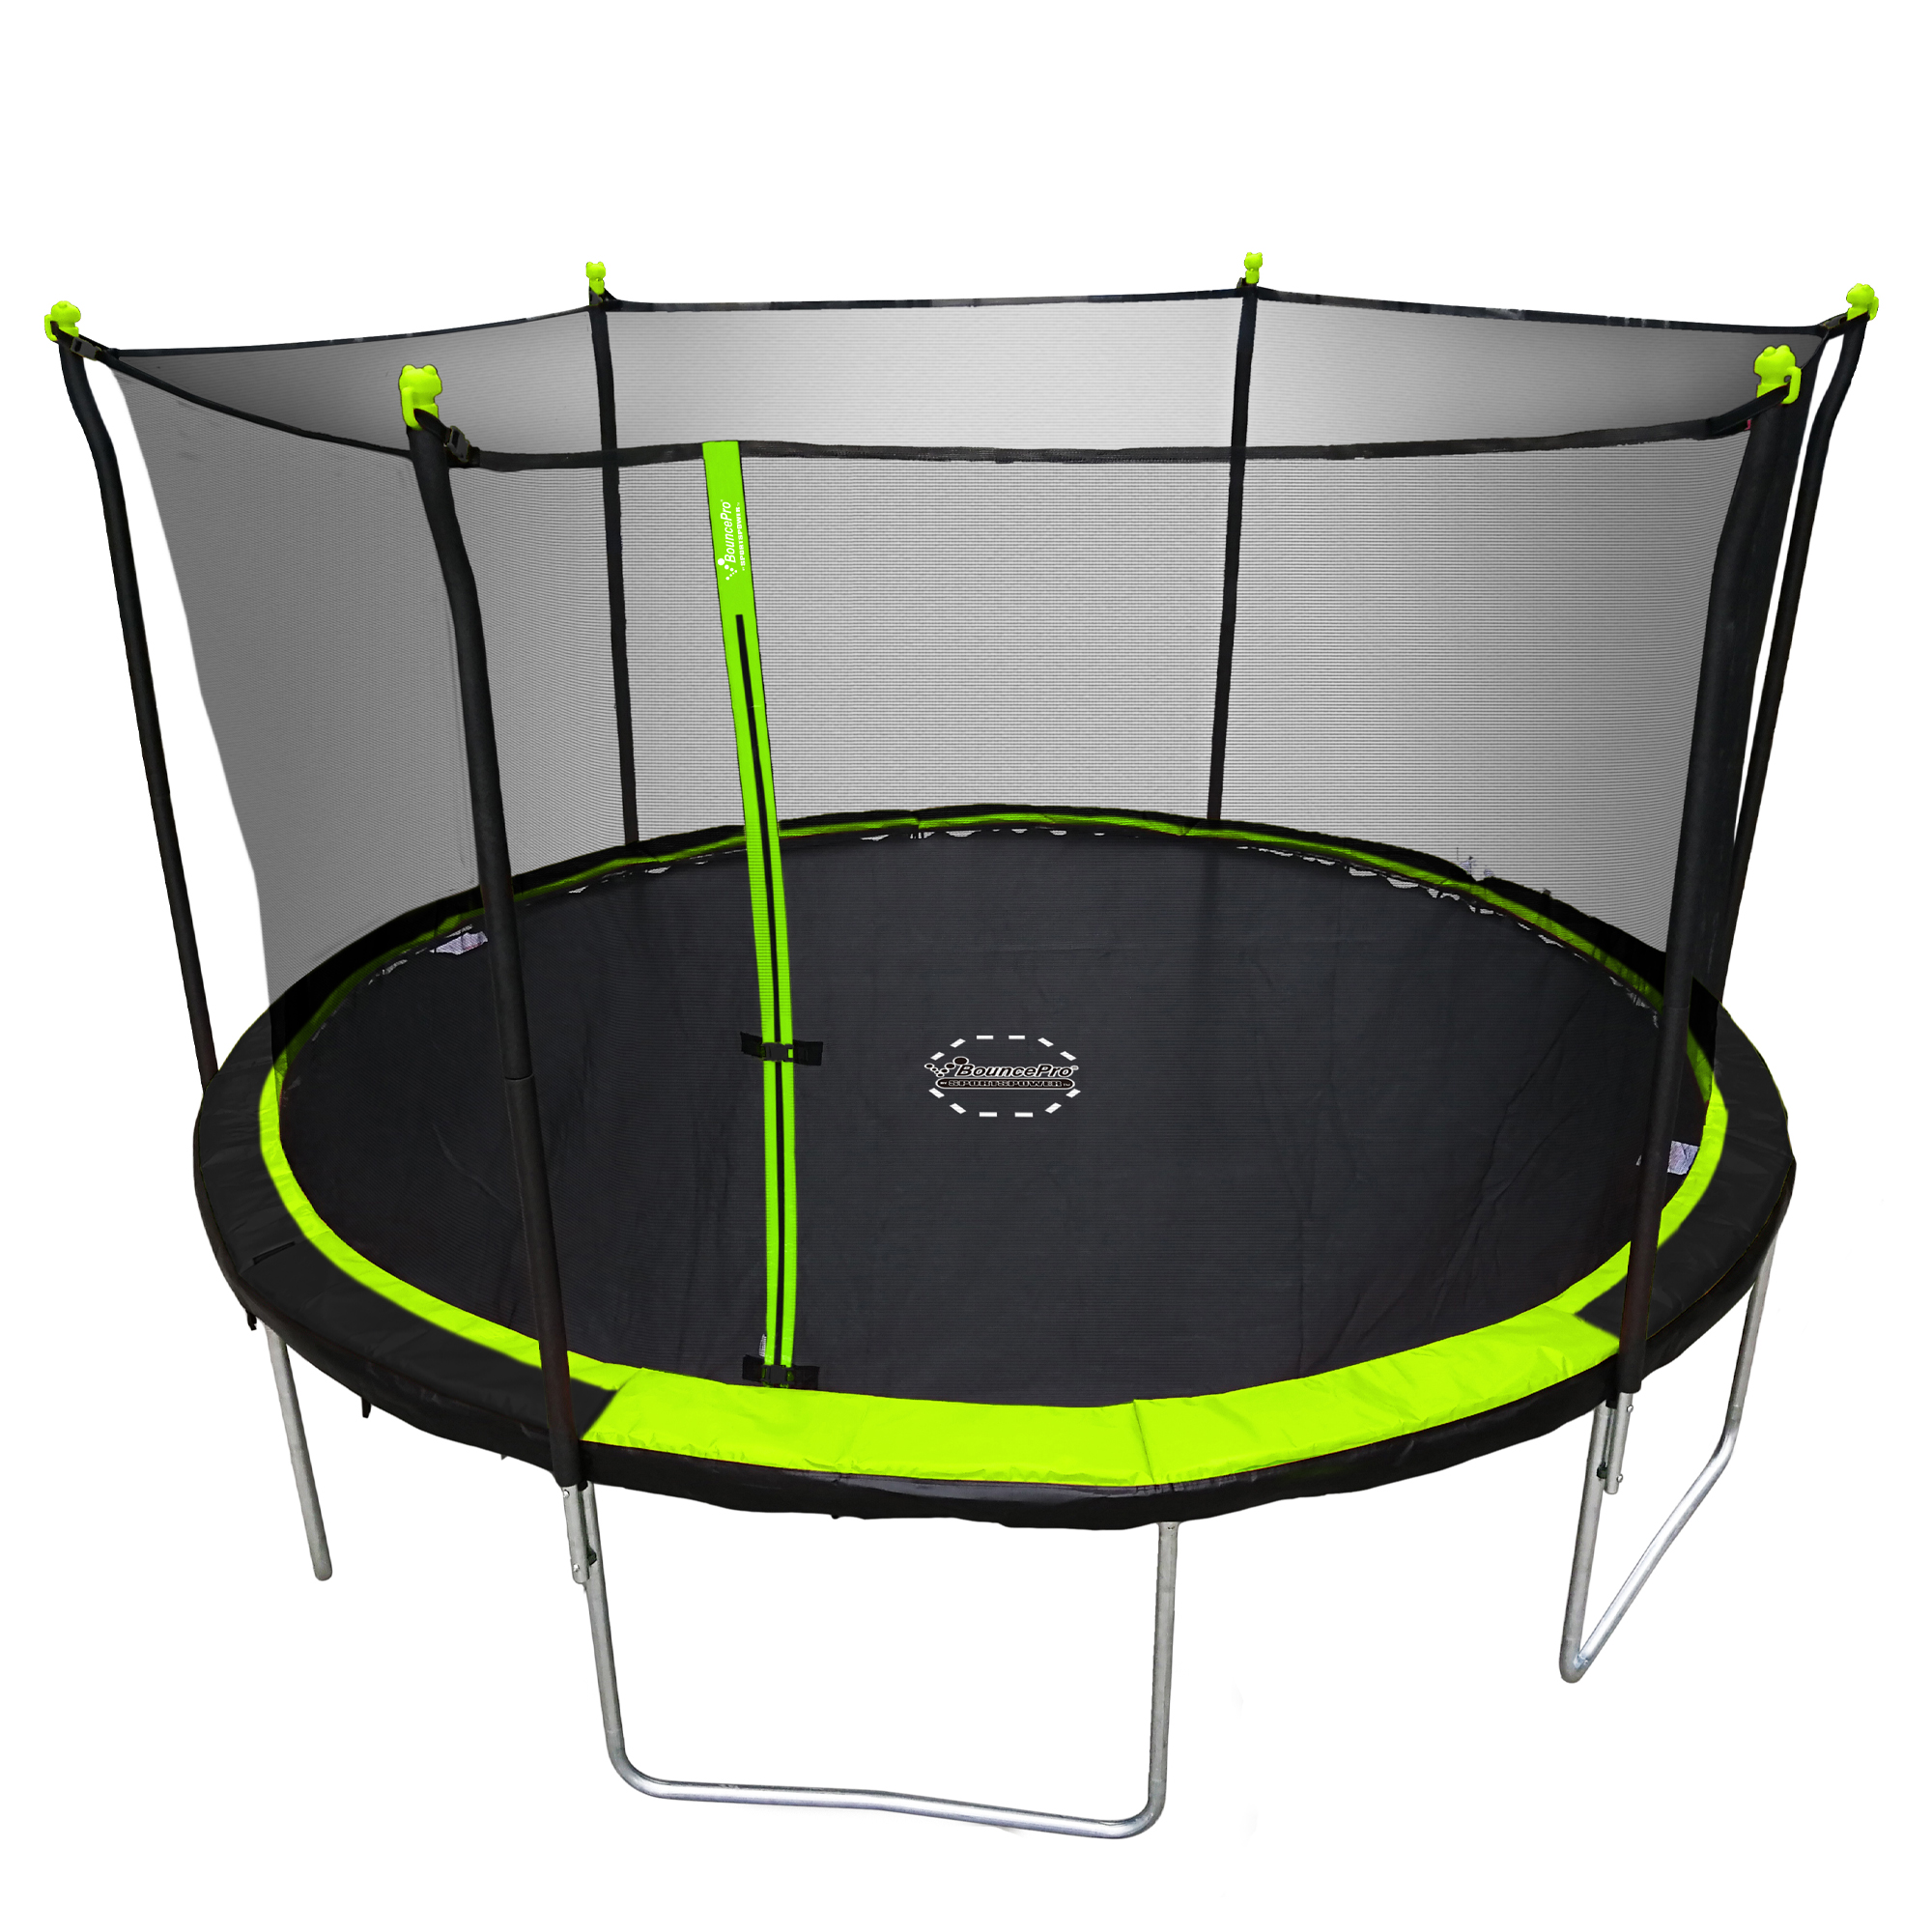 Bounce Pro 14ft Trampoline With Enclosure Combo - image 1 of 9